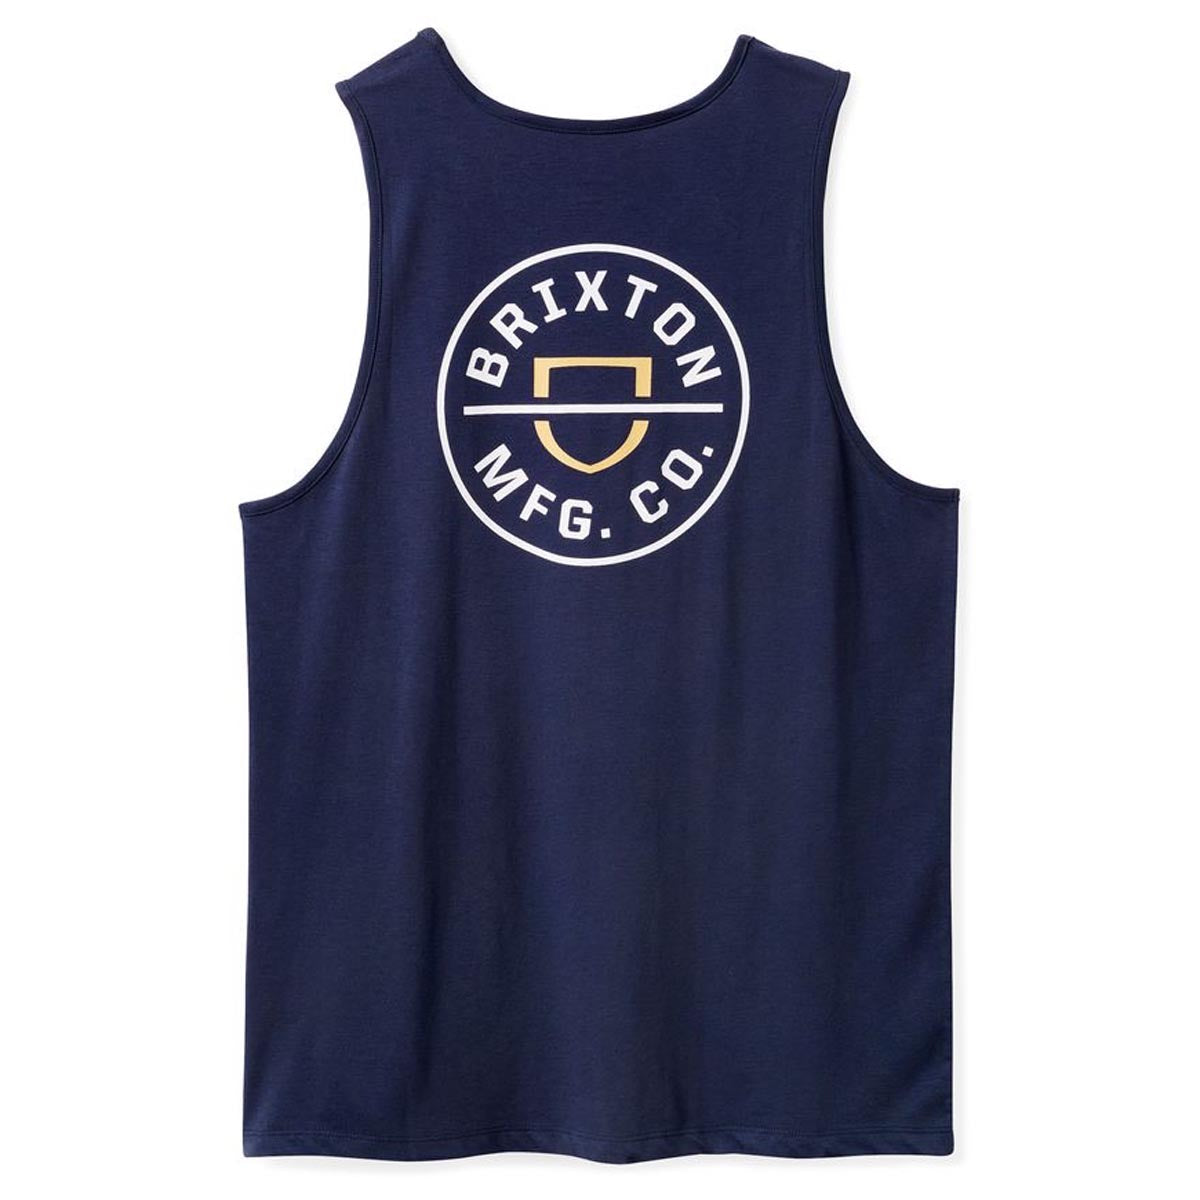 Brixton Crest Tank Top - Washed Navy/Off White image 2